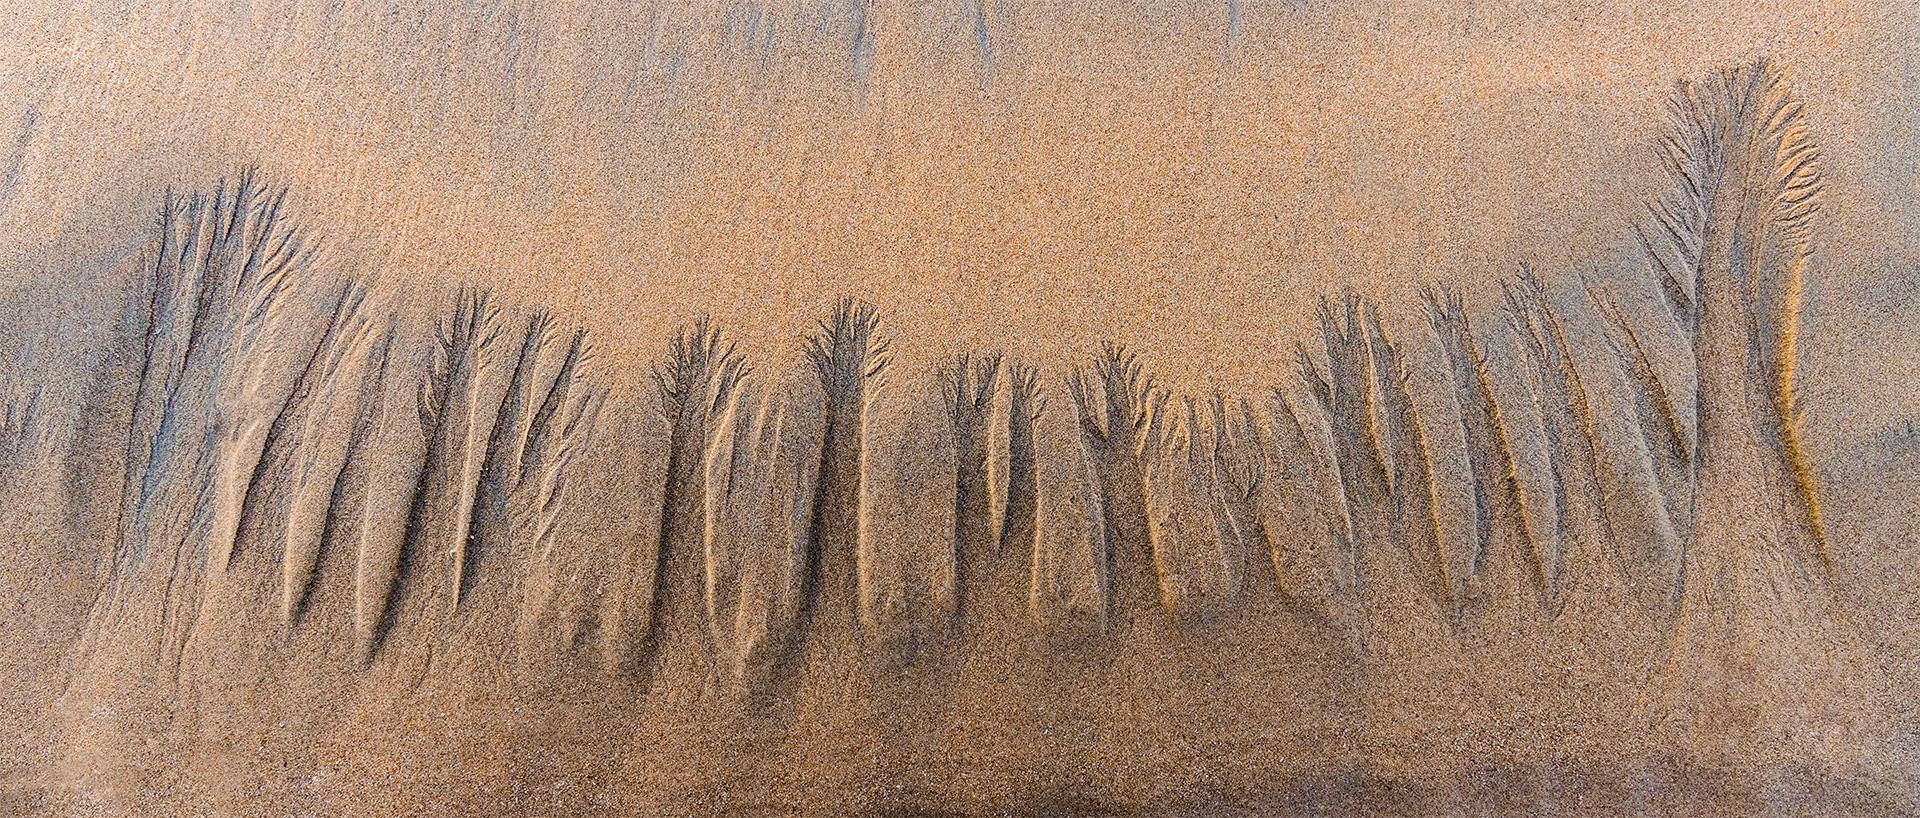 Trees in the Sand